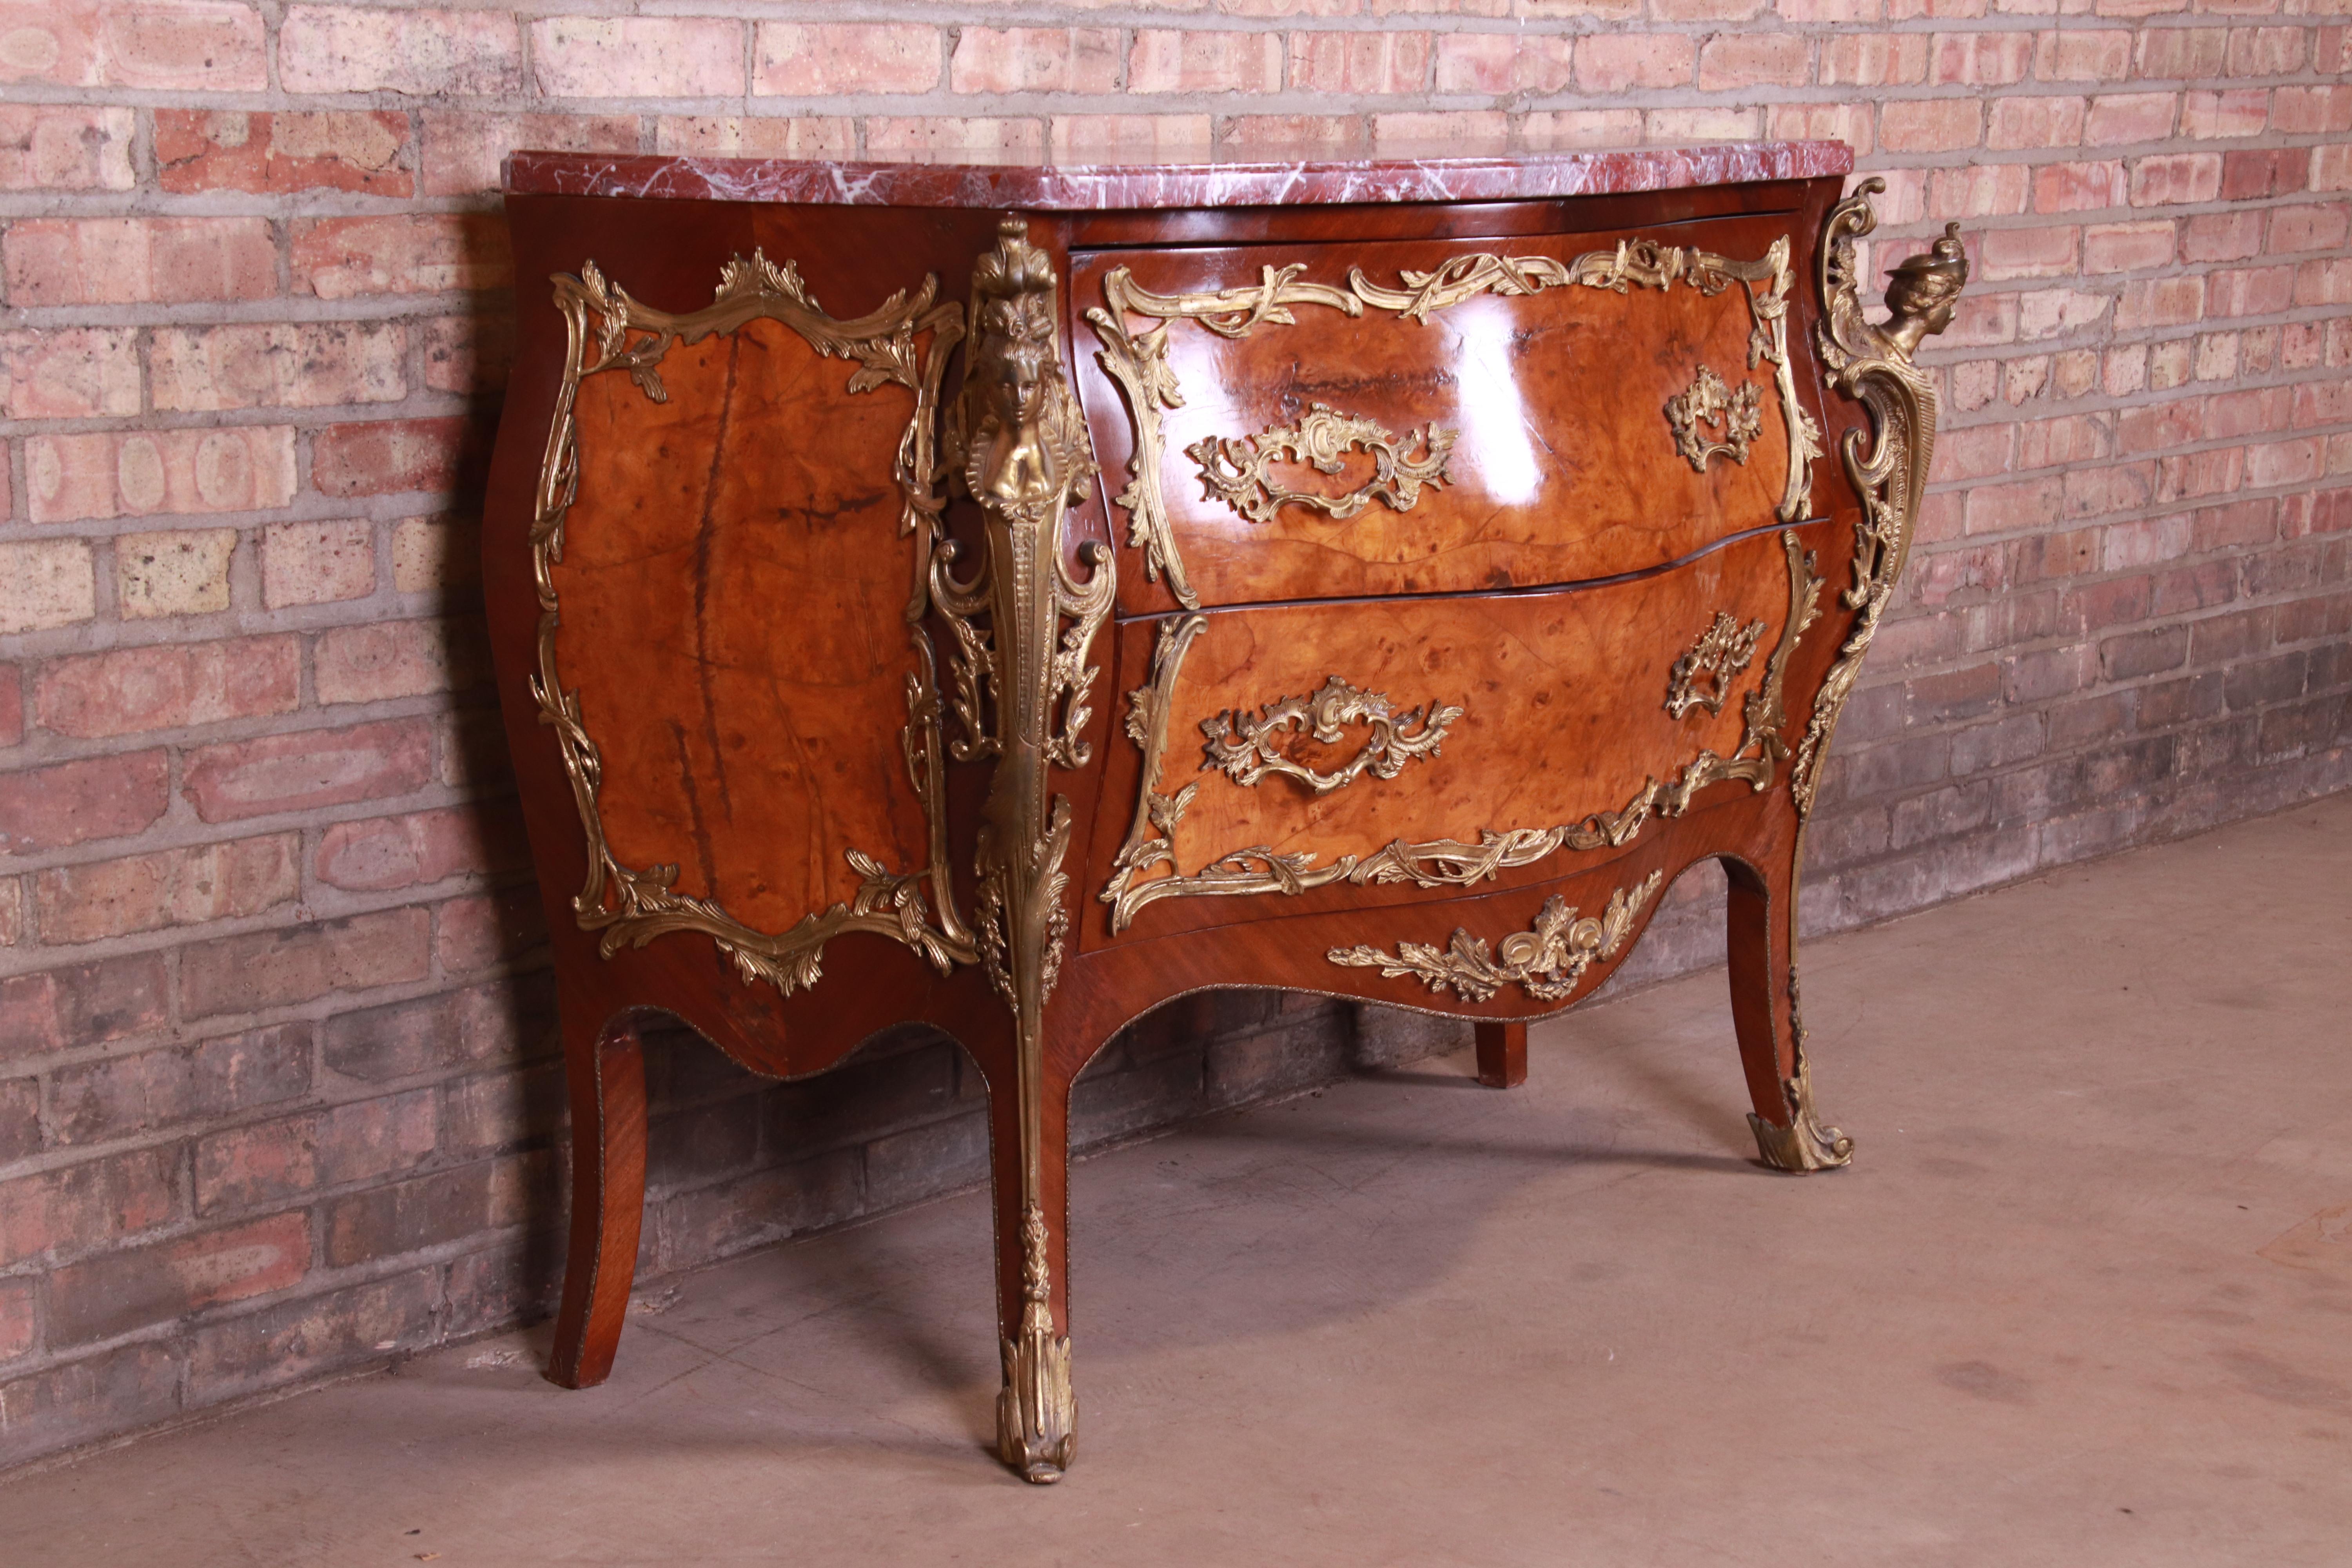 20th Century Antique French Louis XV Marble-Top Bombay Chest Commode with Mounted Ormolu